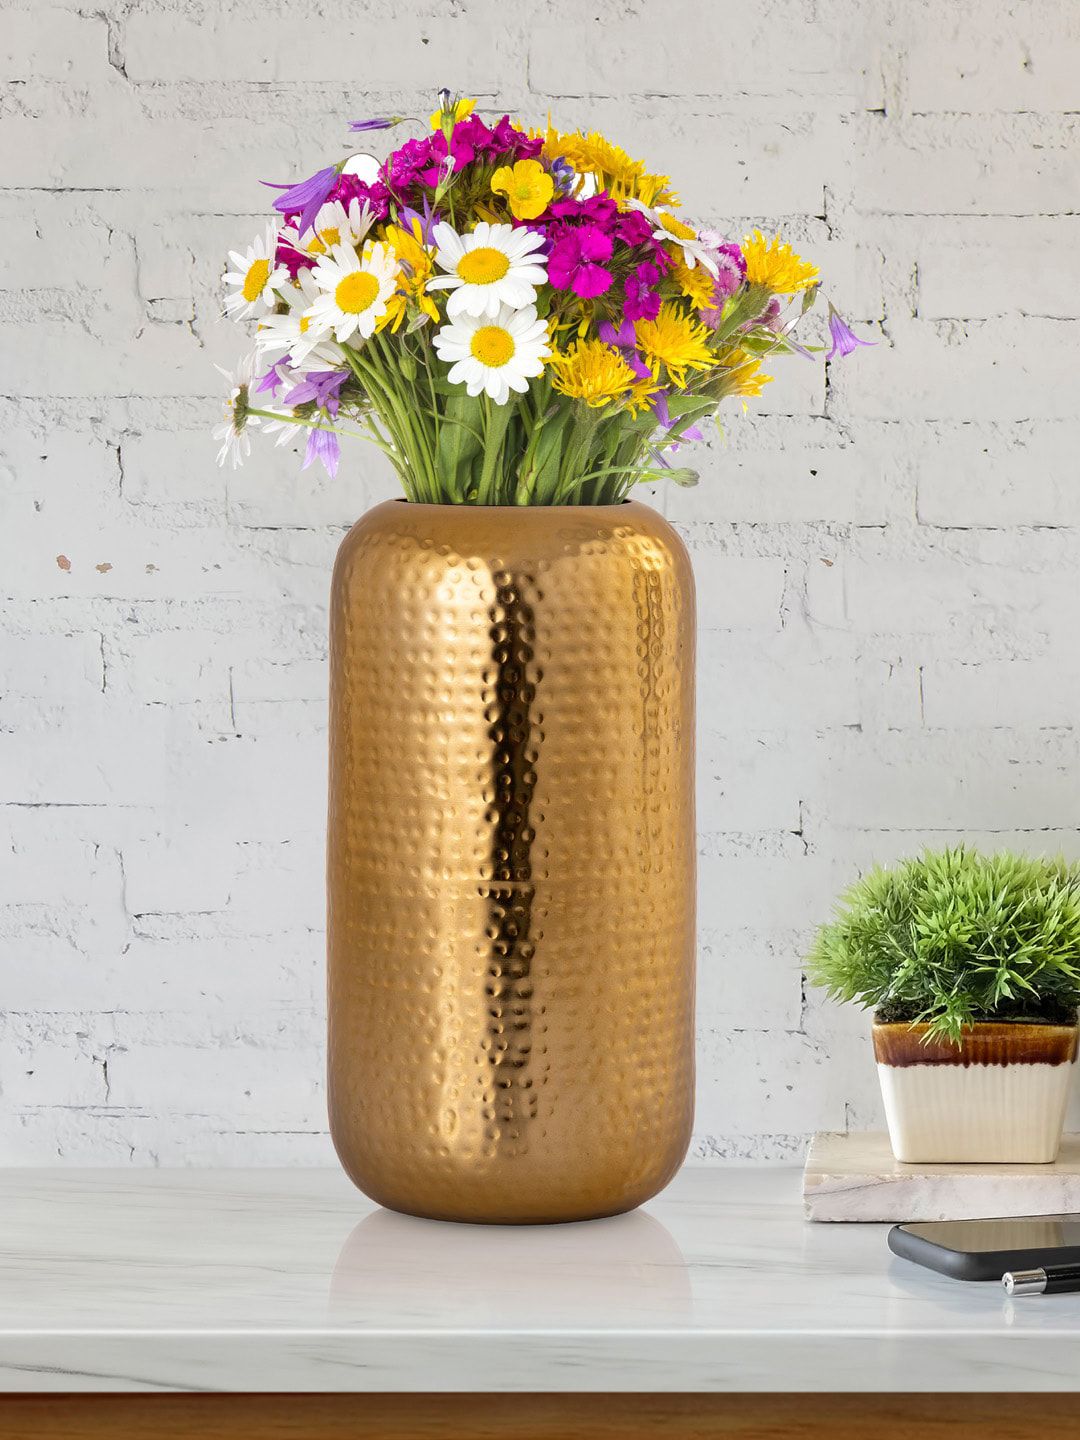 Aapno Rajasthan Gold-Toned Solid Shiny Hammered Cylindrical Flower Vase Price in India